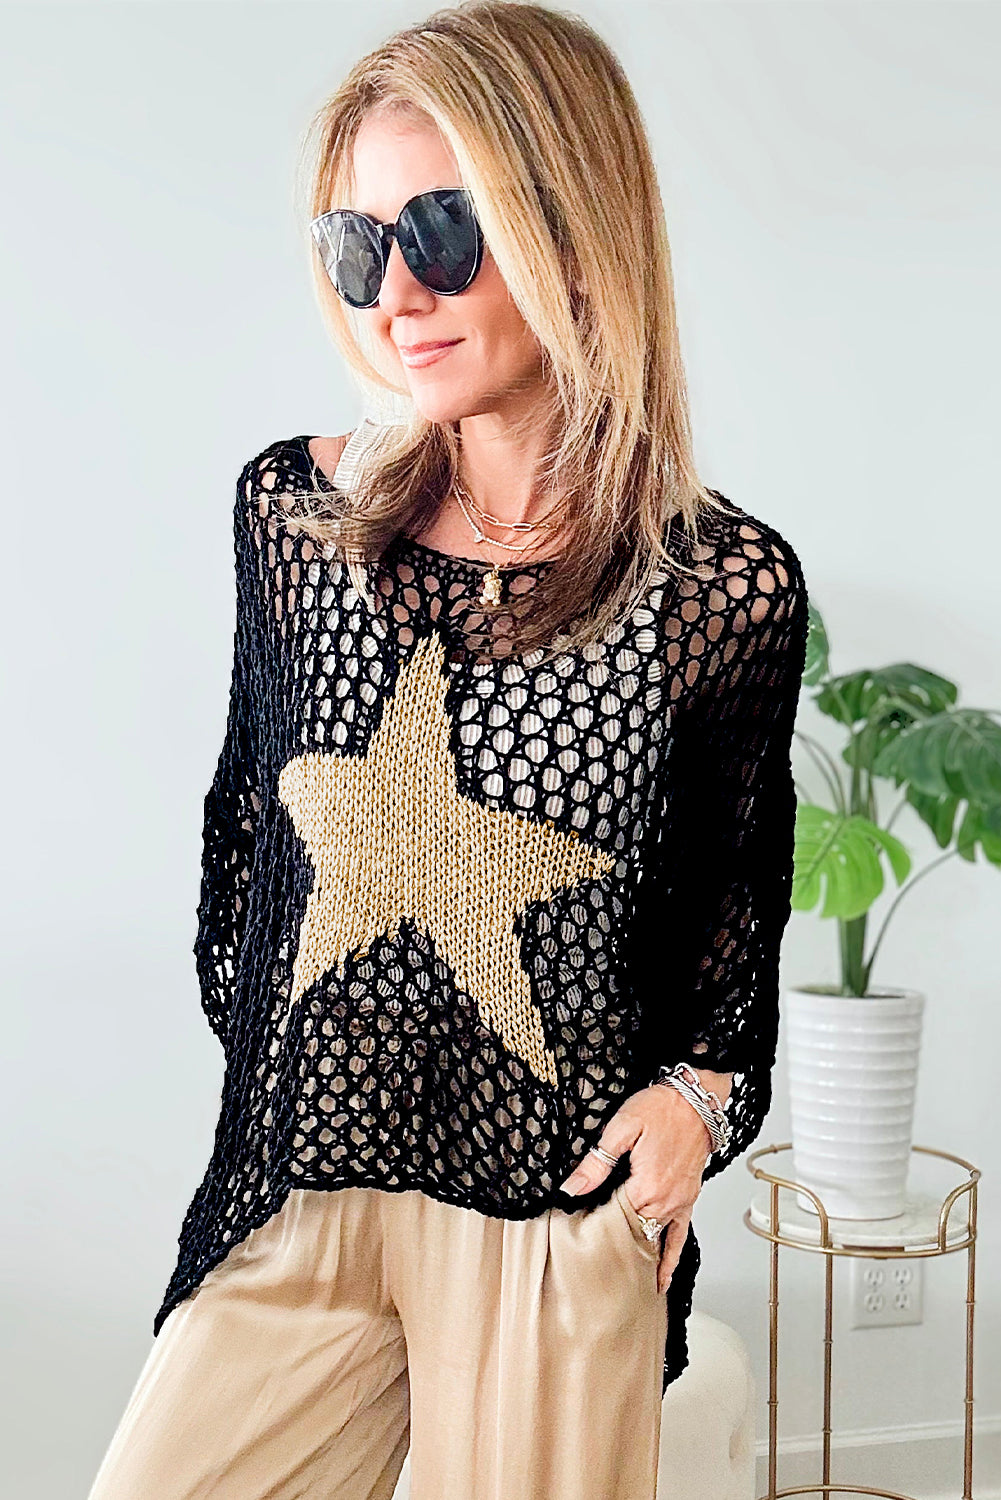 White Star Hollow Knitted Oversized Summer Tee